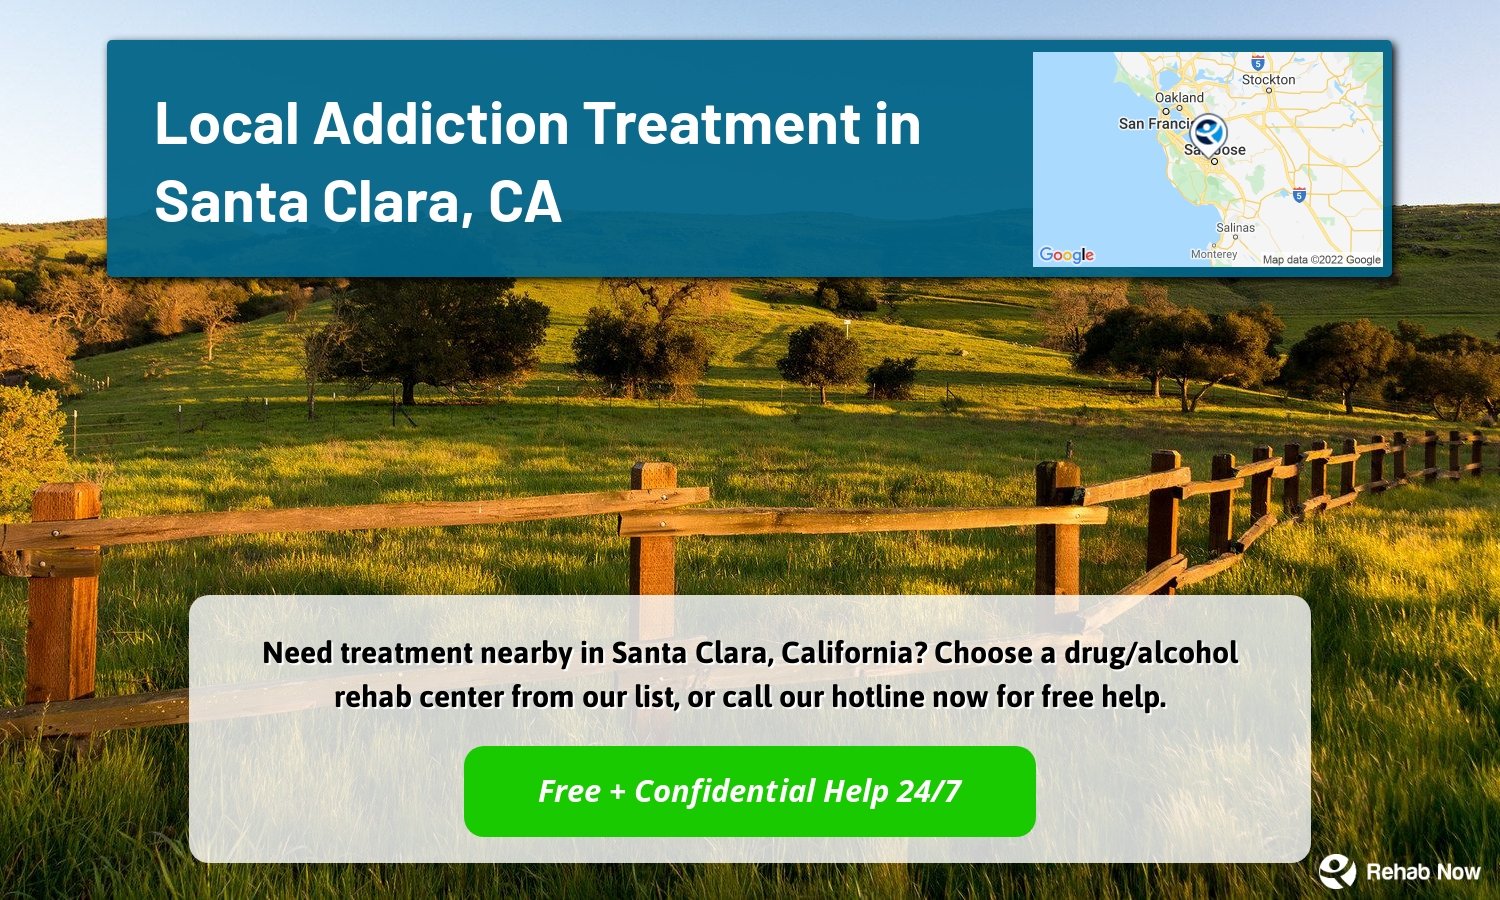 Need treatment nearby in Santa Clara, California? Choose a drug/alcohol rehab center from our list, or call our hotline now for free help.